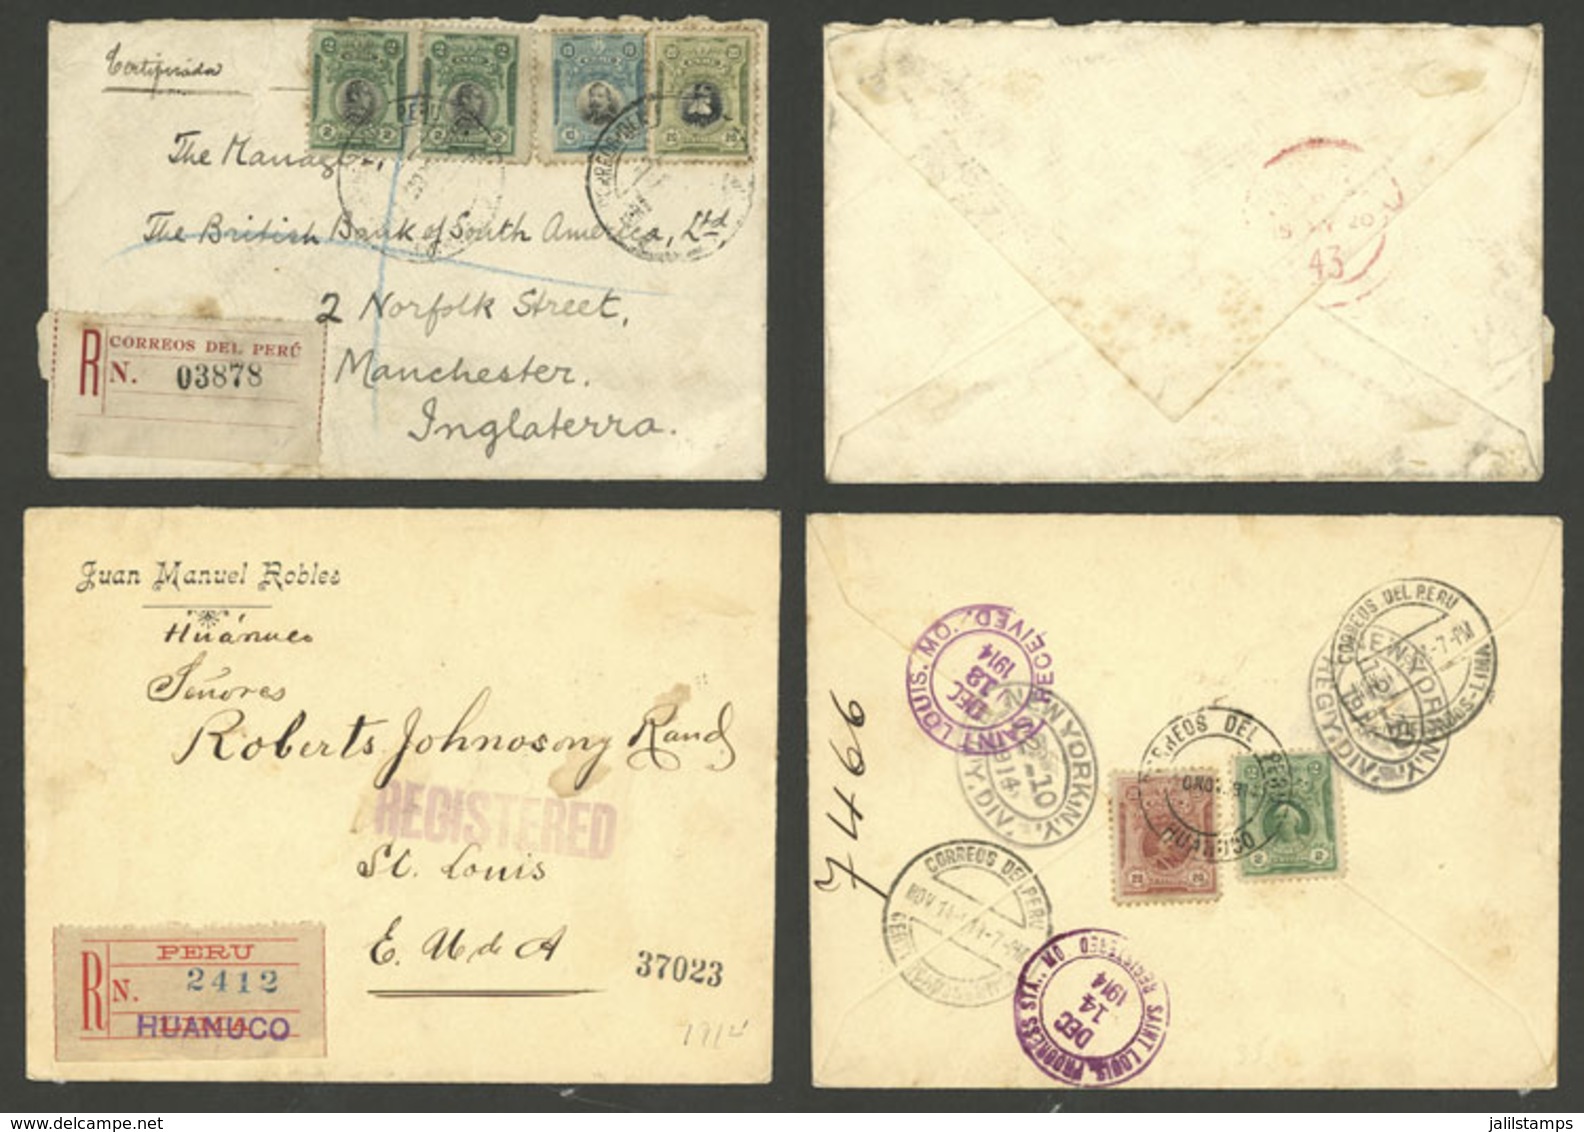 PERU: 2 Registered Covers Sent In 1914 And 1920 From Huanuco And ? To USA And England Through The Panama Canal, Franked  - Perú